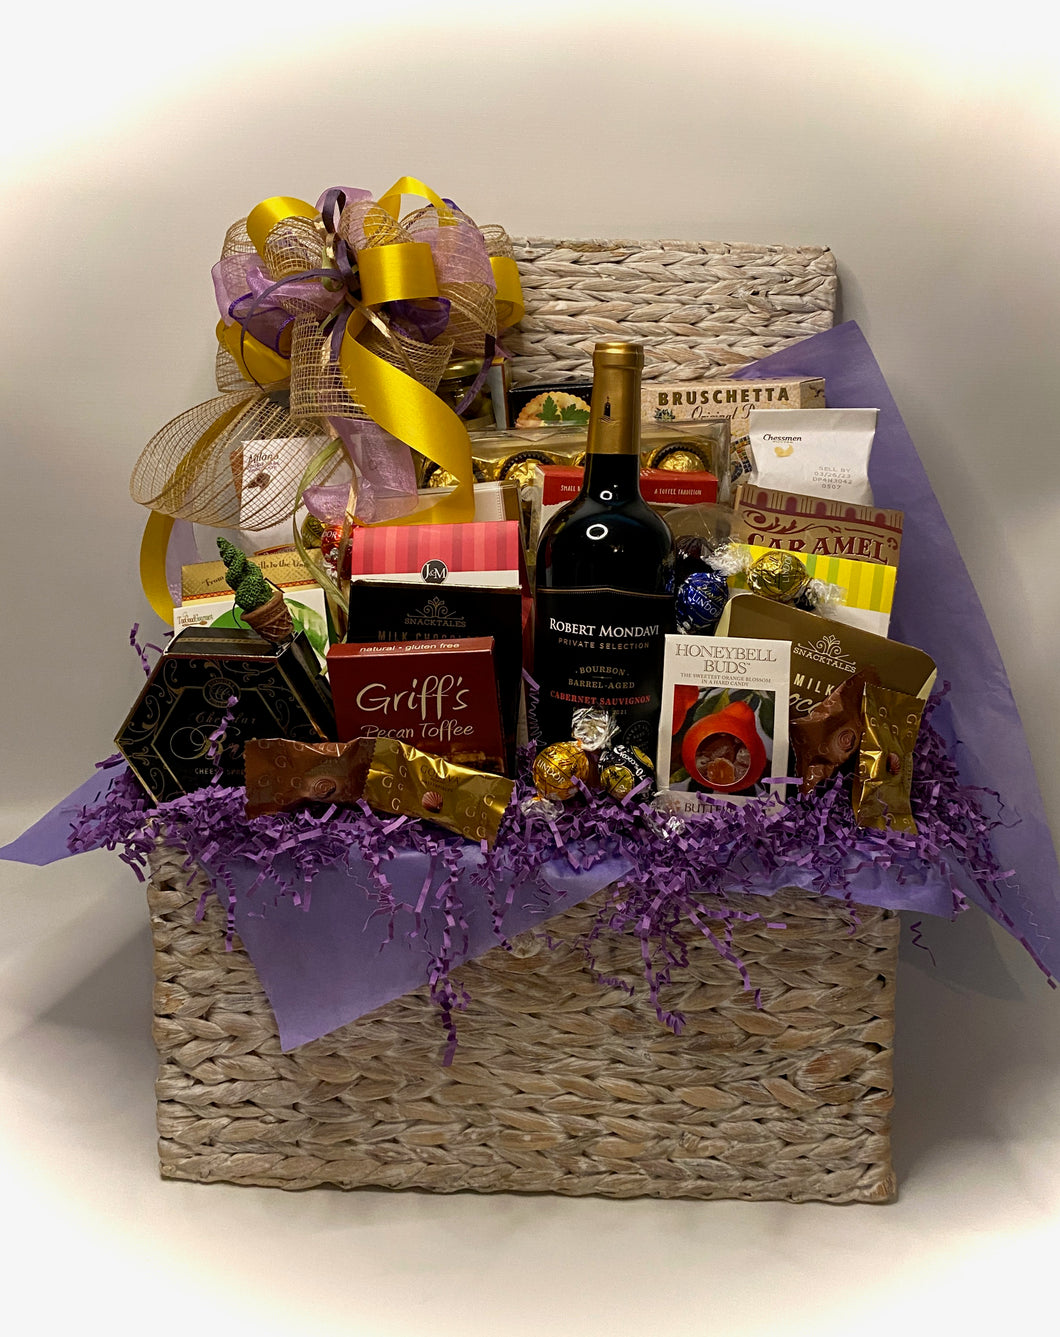 We also have chosen a variety of chocolates, crackers, cheeses, cheese spreaders, chocolate wafers, focaccia crips, bruschetta chips, water crackers, caramel popcorn, cookies, toffee pretzels, candied peanuts, biscotti and so much more! This gift comes beautifully wrapped in a cello, with a notecard and a beautiful handmade bow. 